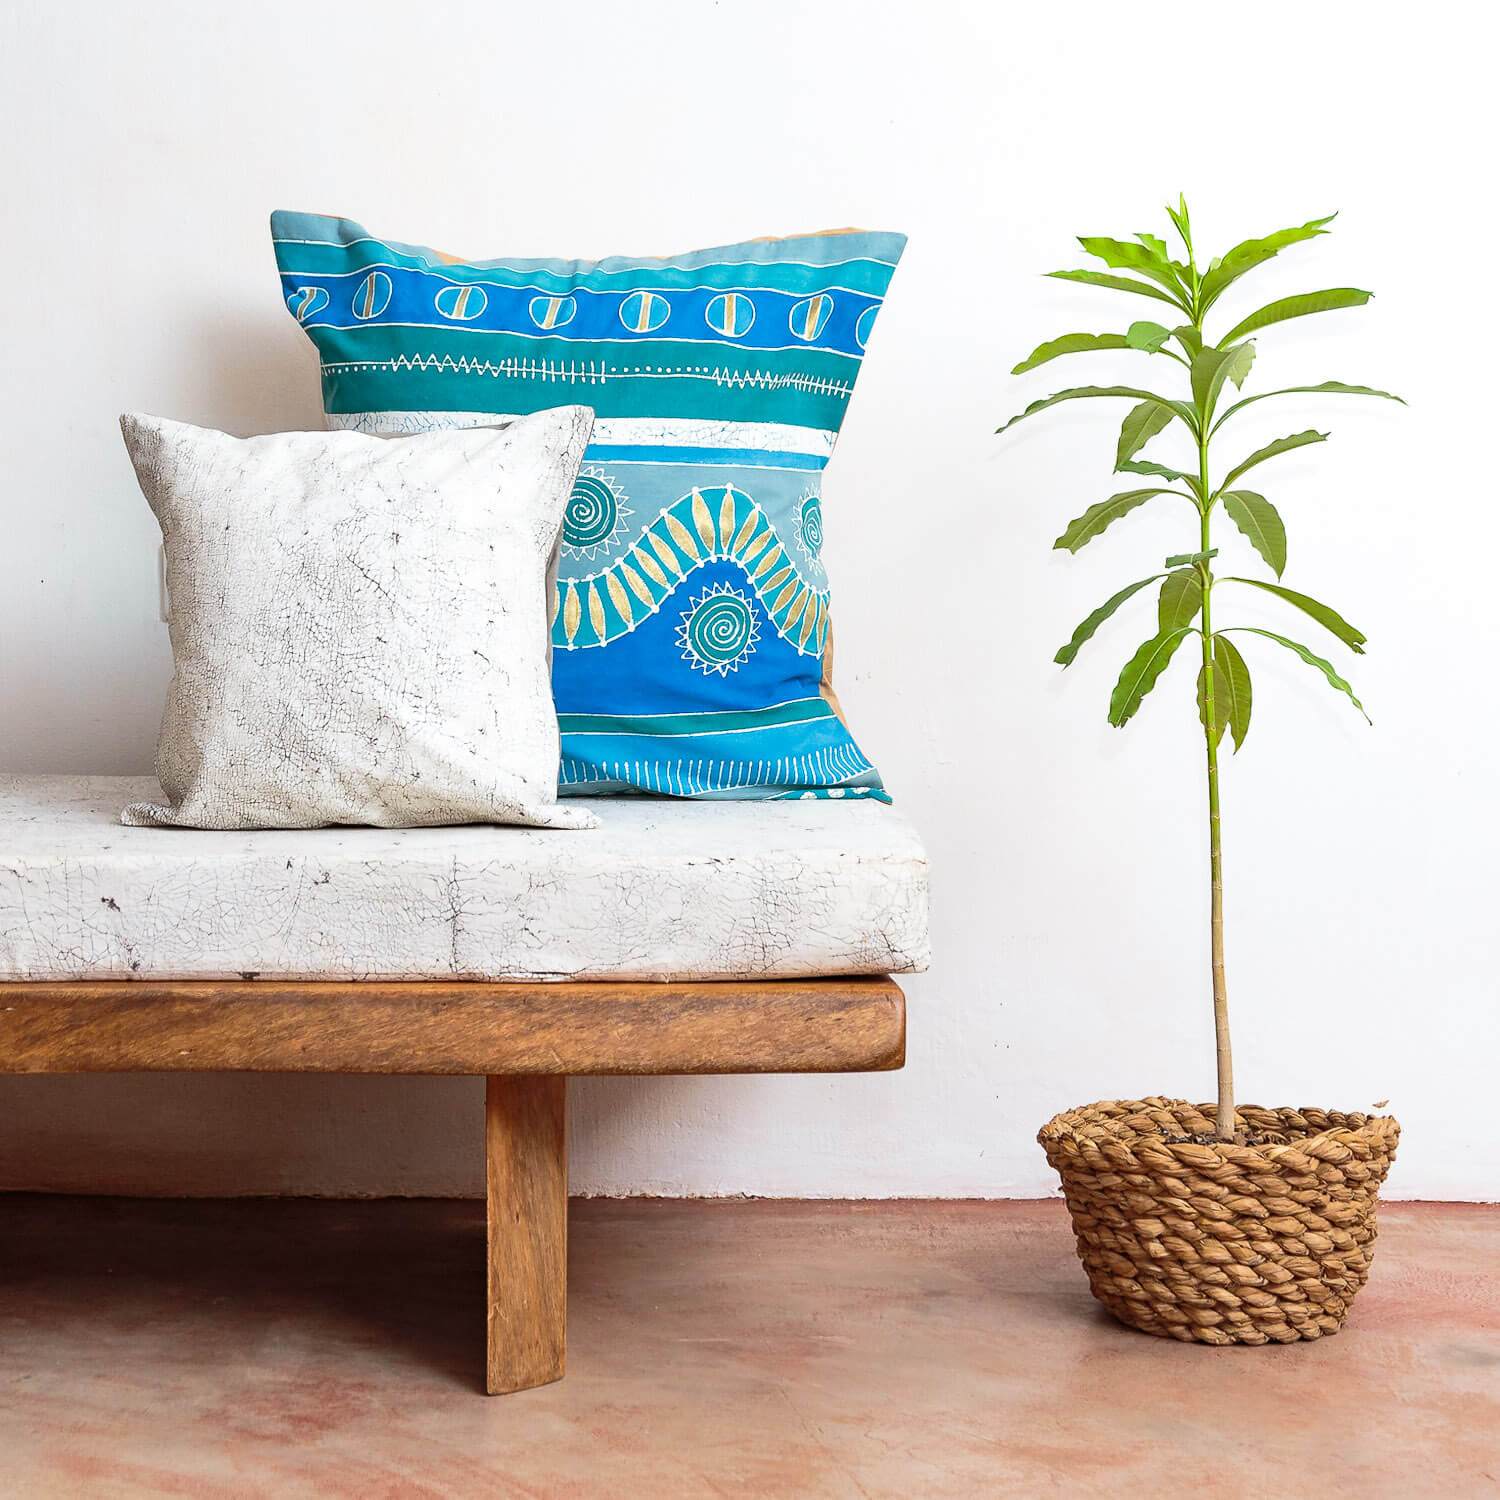 Mali Aqua Hills Cushion Cover - Hand Painted by TRIBAL TEXTILES - Handcrafted Home Decor Interiors - African Made